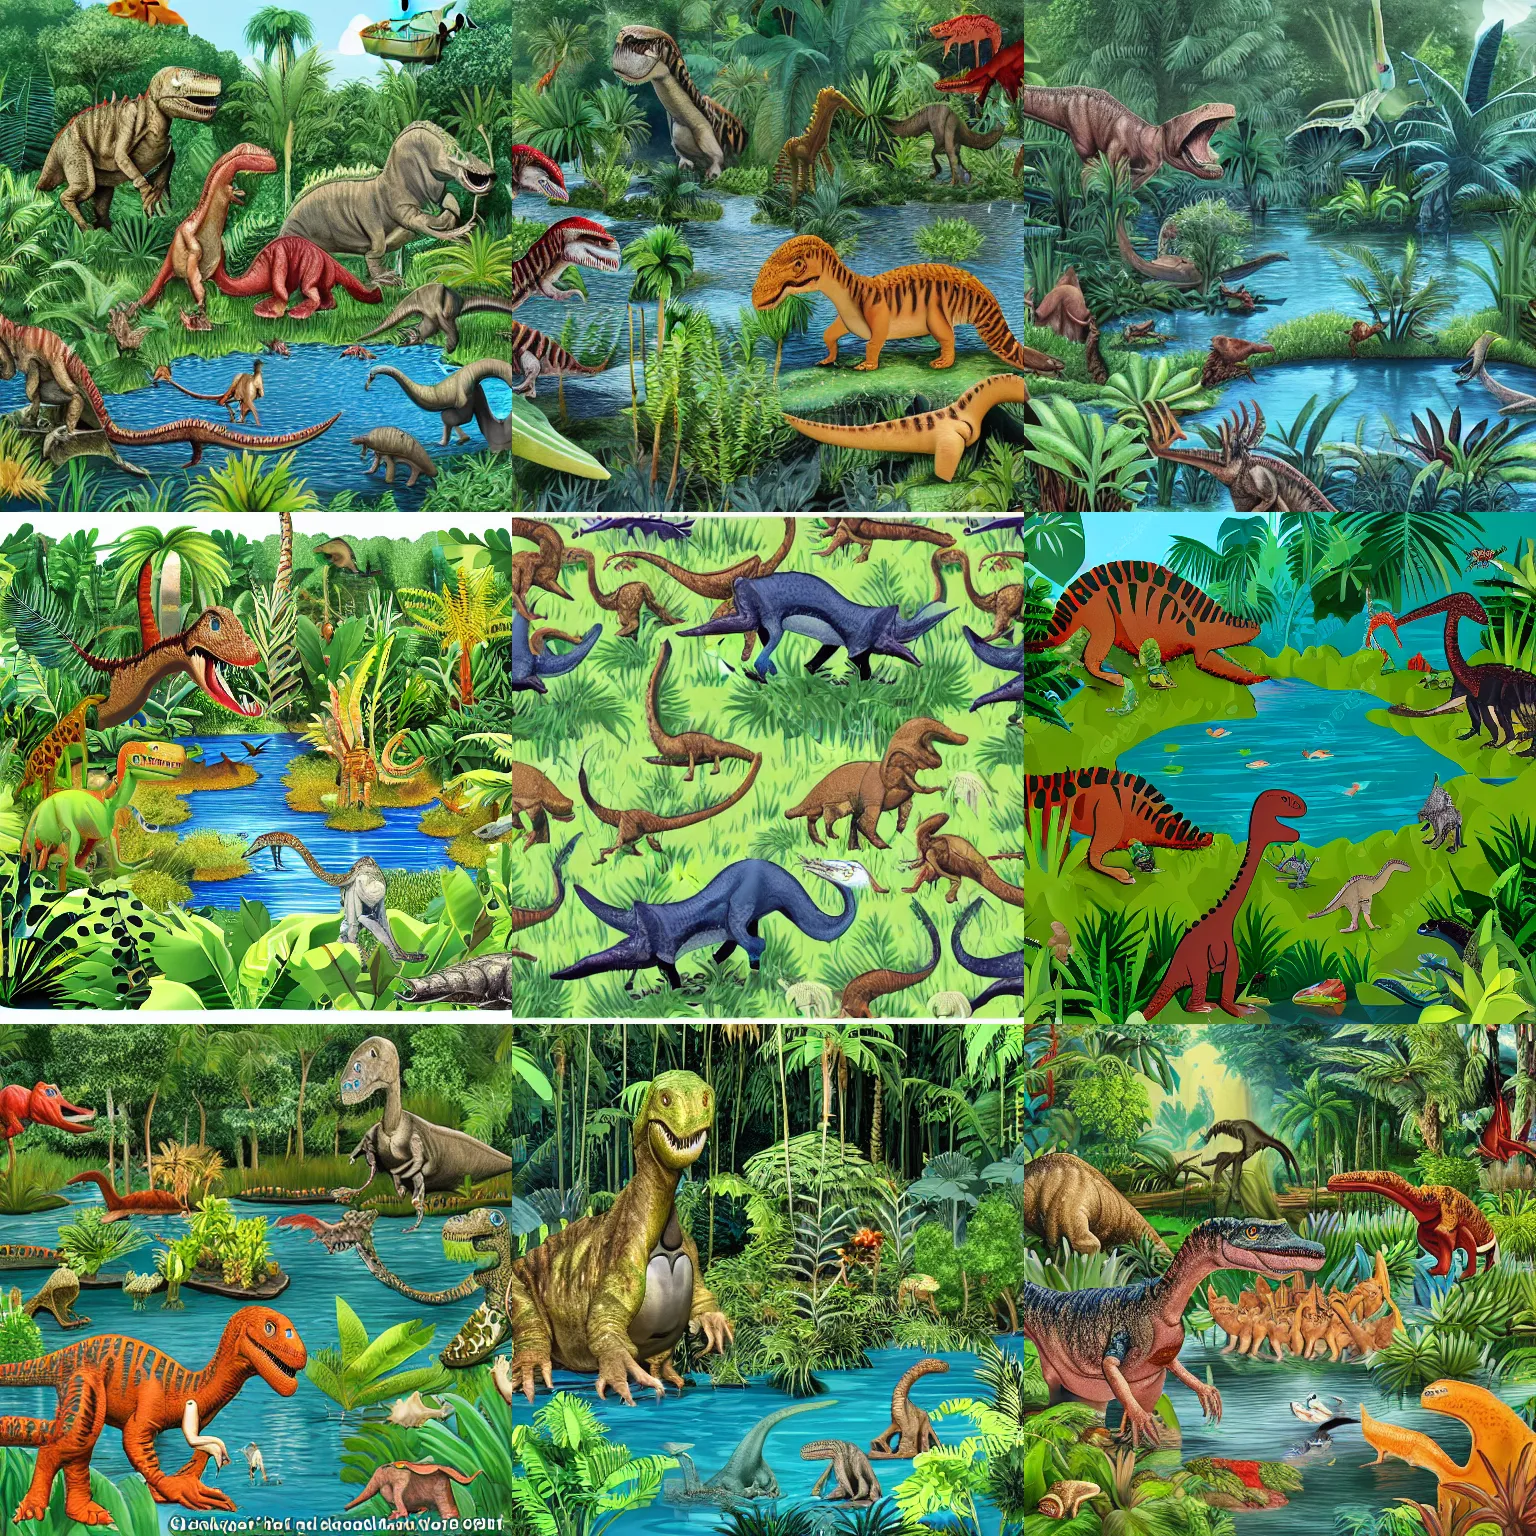 Prompt: jurassic jungle pond with many dinosaurs gathered